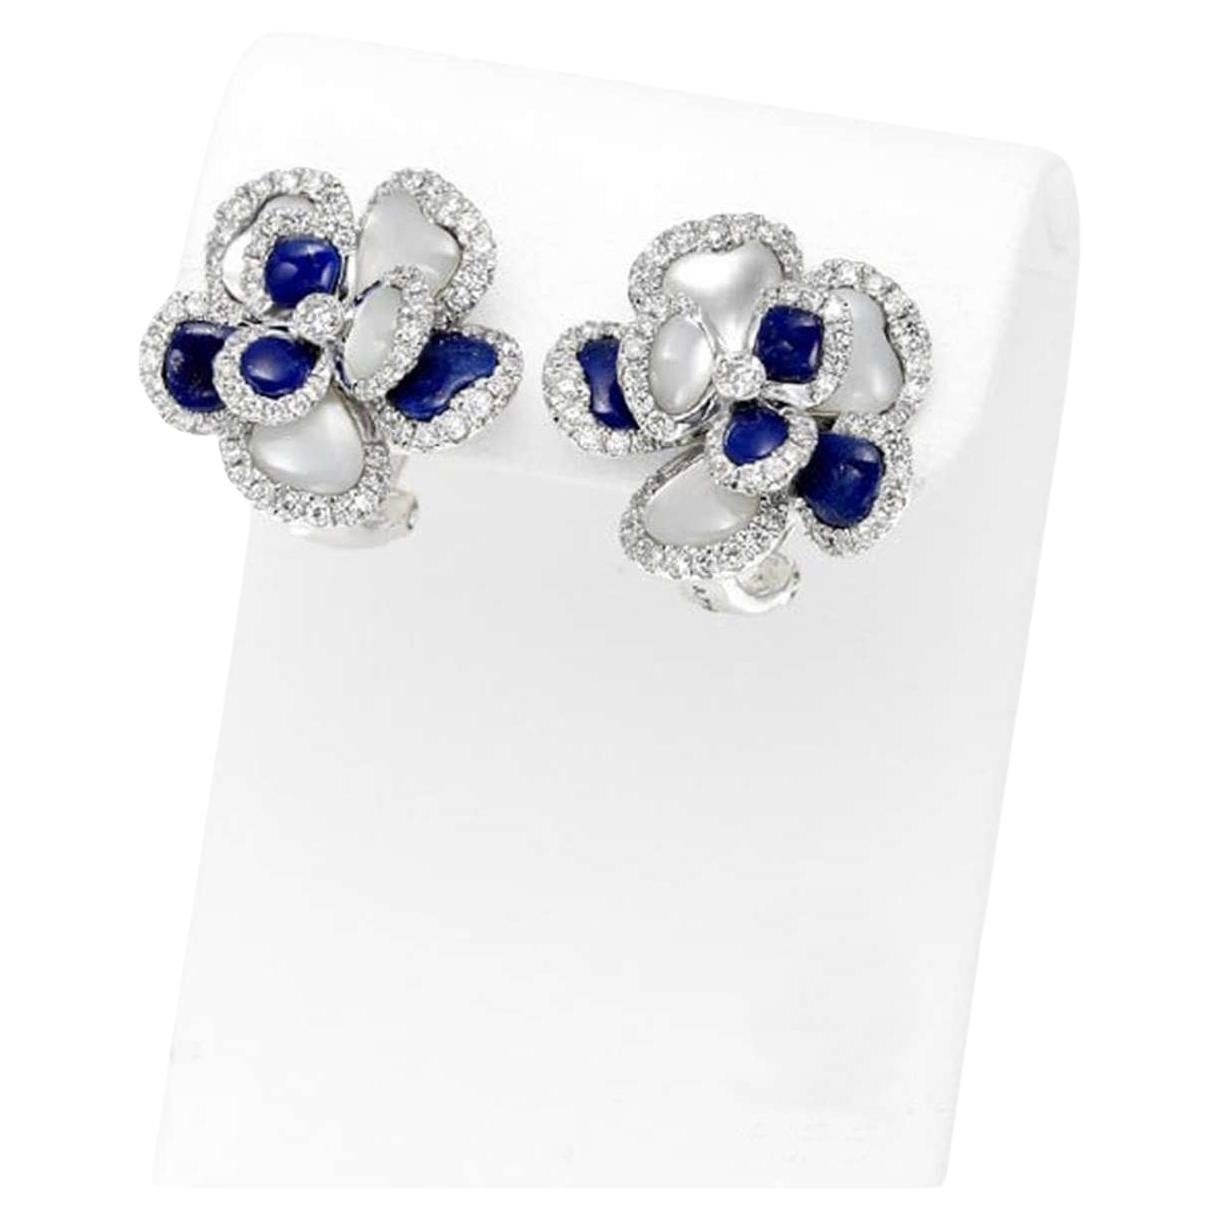 Elevate your jewelry collection with these exquisite lapis lazuli mother-of-pearl diamond earrings, crafted in luxurious 18K white gold. These earrings are a stunning combination of sophistication and elegance, featuring captivating lapis lazuli